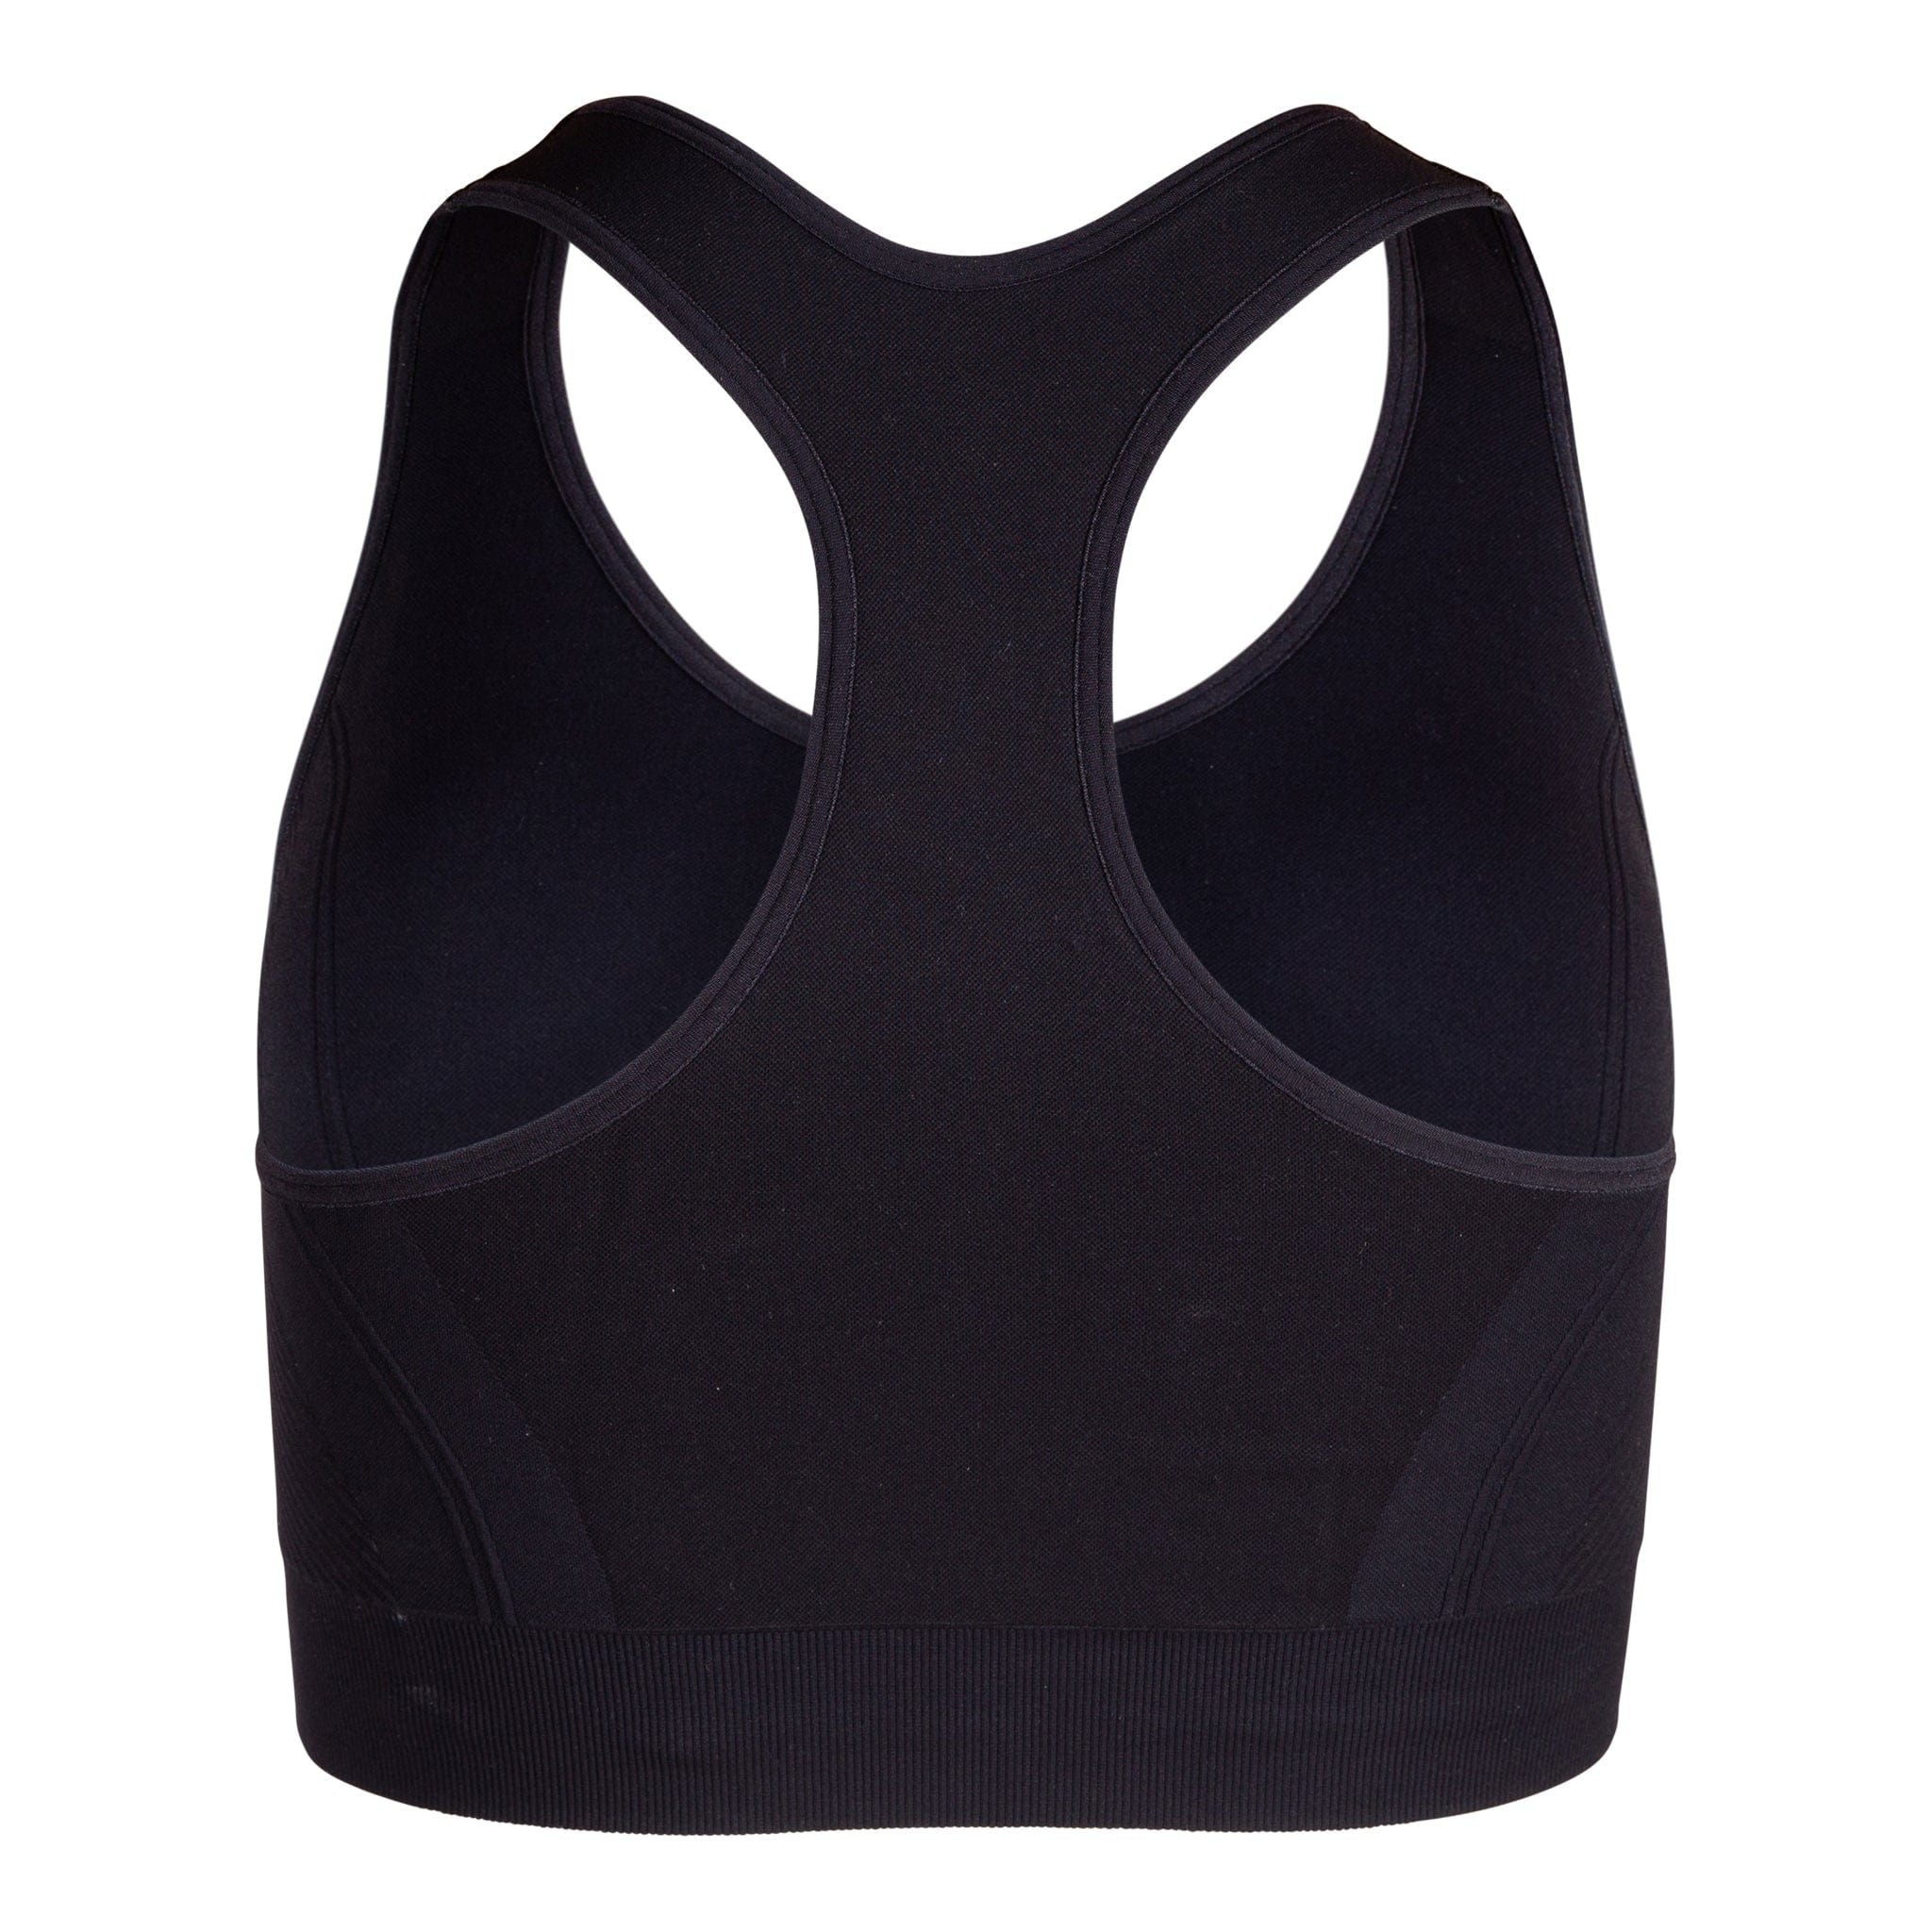 Women's One Shoulder Sports Bra Medium Support Removable Pad Wireless Solid  Color Black Khaki Yoga Fitness Gym Workout Top Sport Activewear Breathable